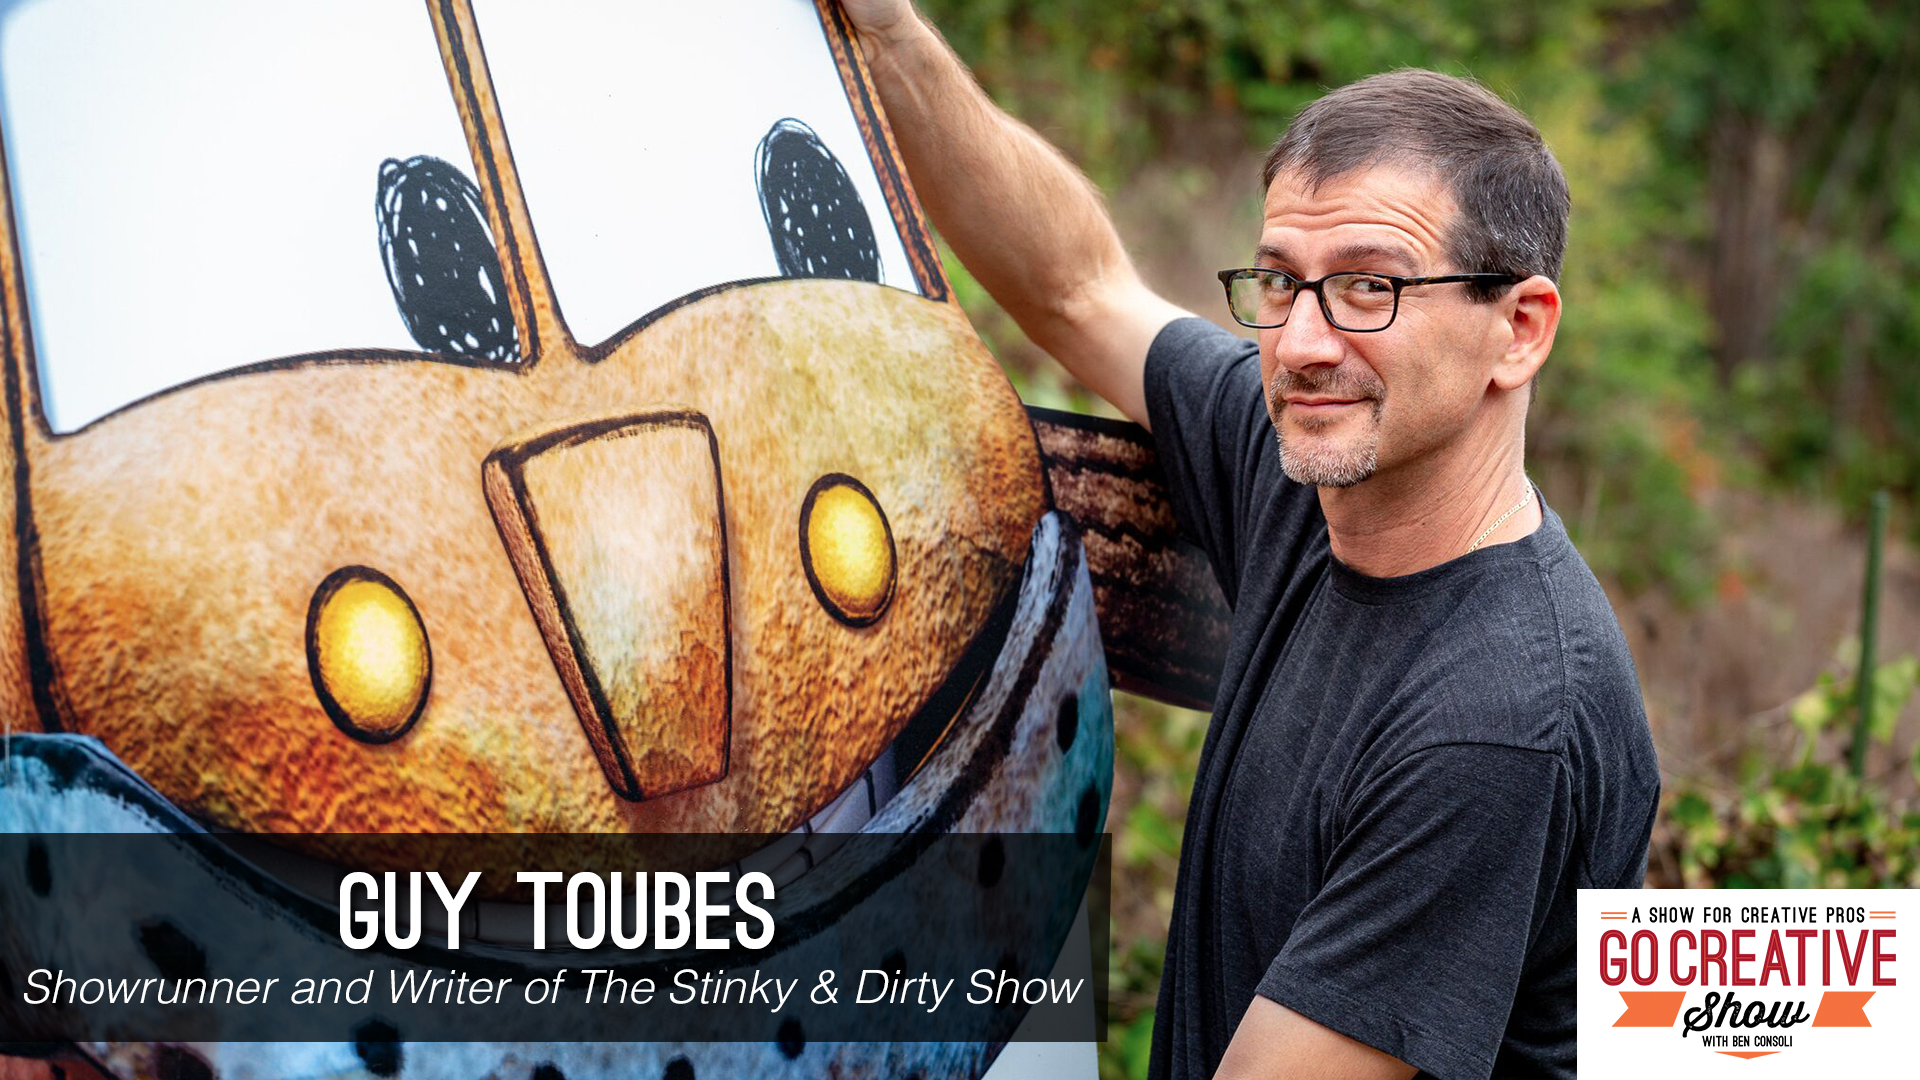 Guy Toubes showrunner for Stinky and Dirty Show on Go Creative Show with Ben Consoli